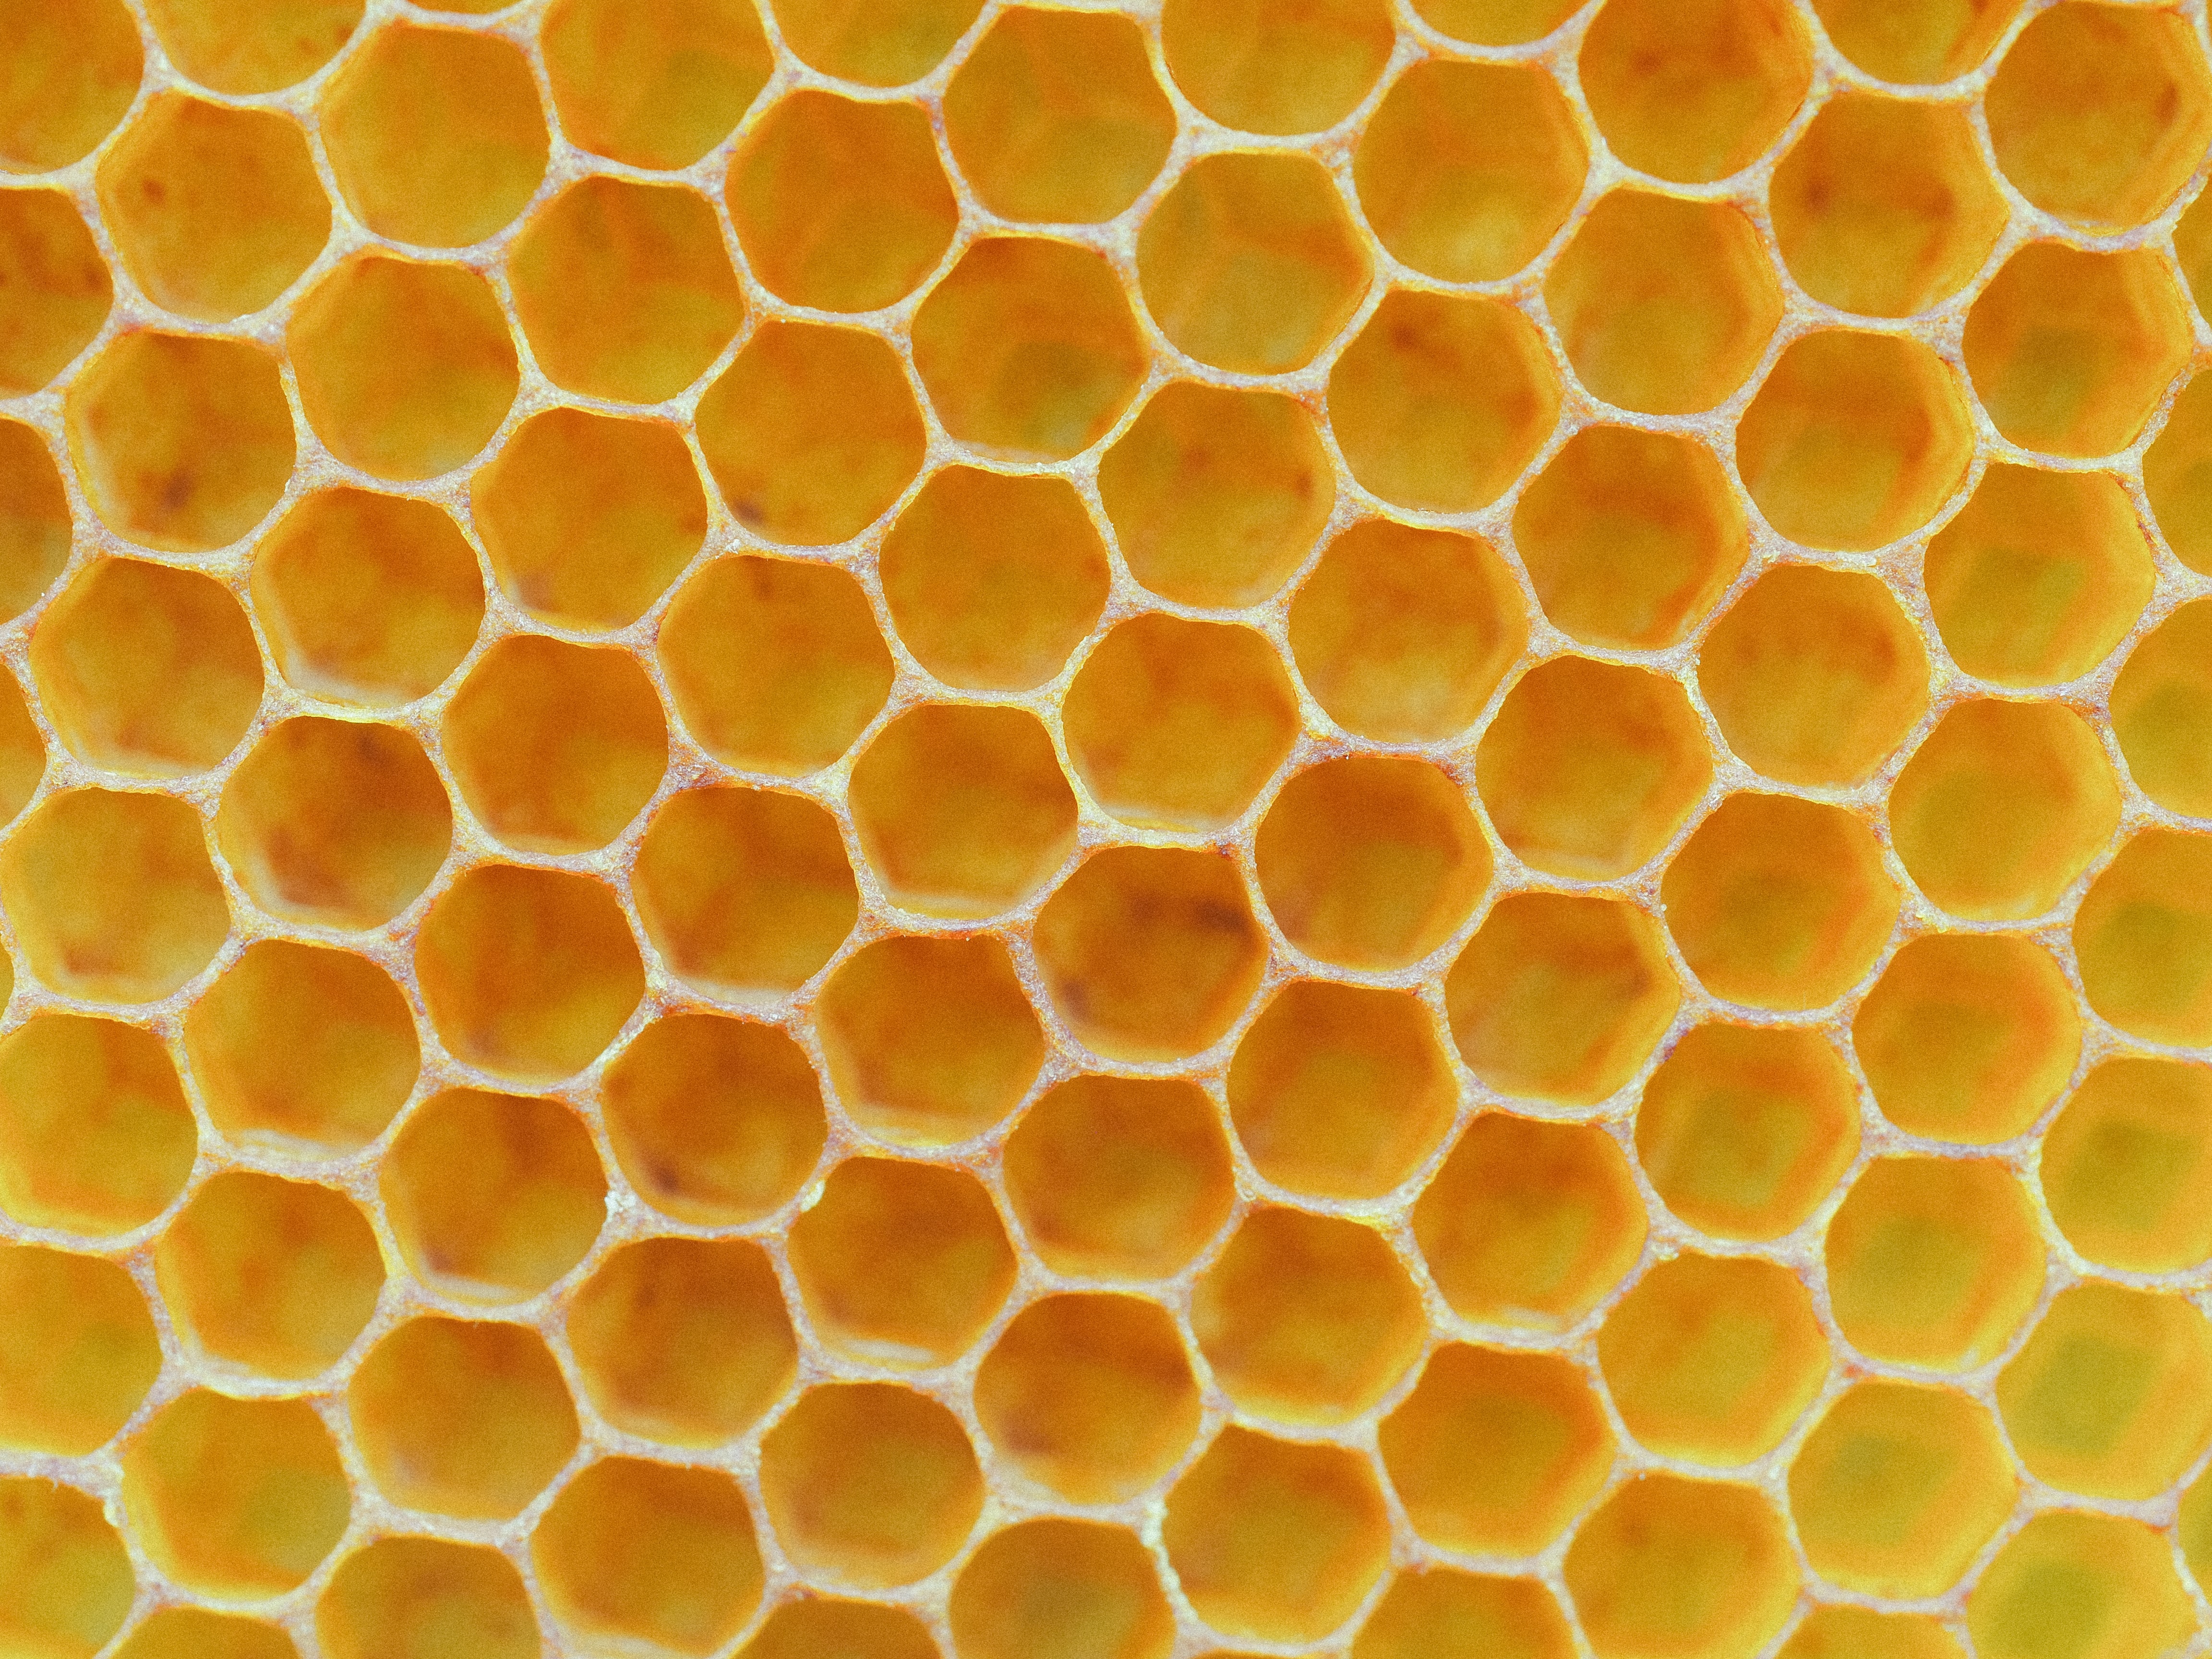 Image of a bee hive